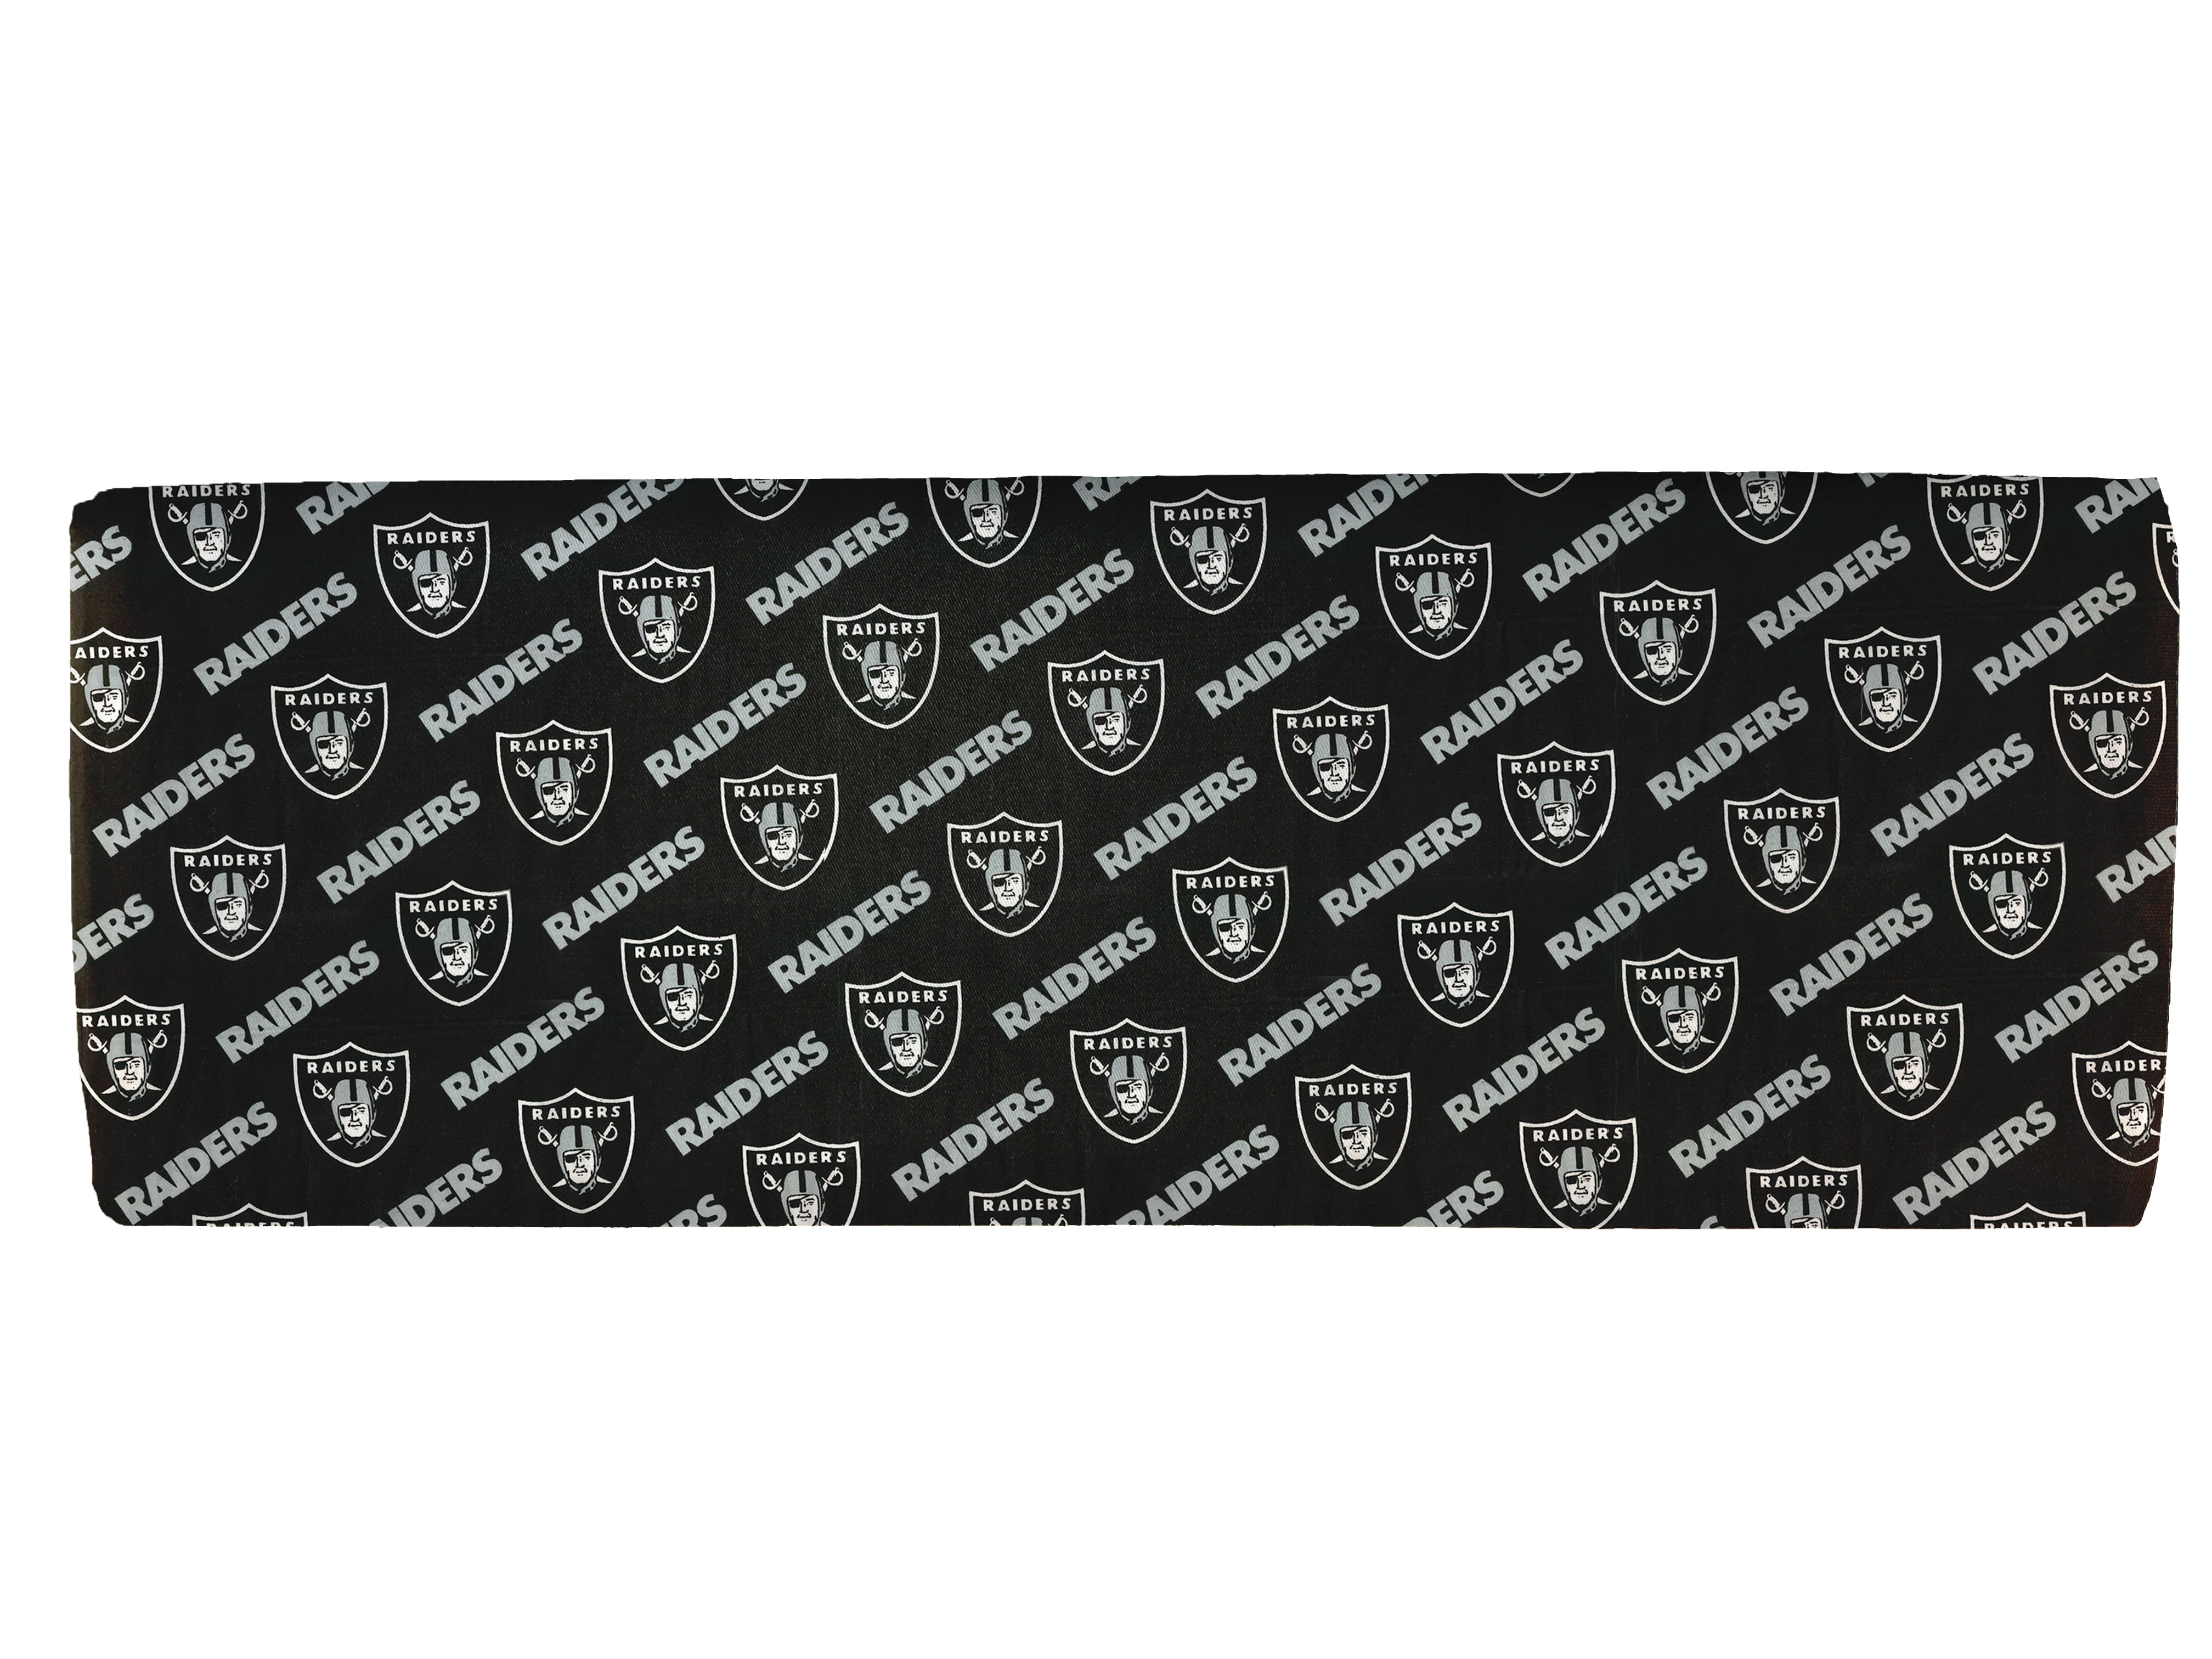 Las Vegas Raiders NFL Football Mini-Print Design in Black by Fabric  Traditions 58-60 inches wide 100% Cotton Fabric NFL-14498D